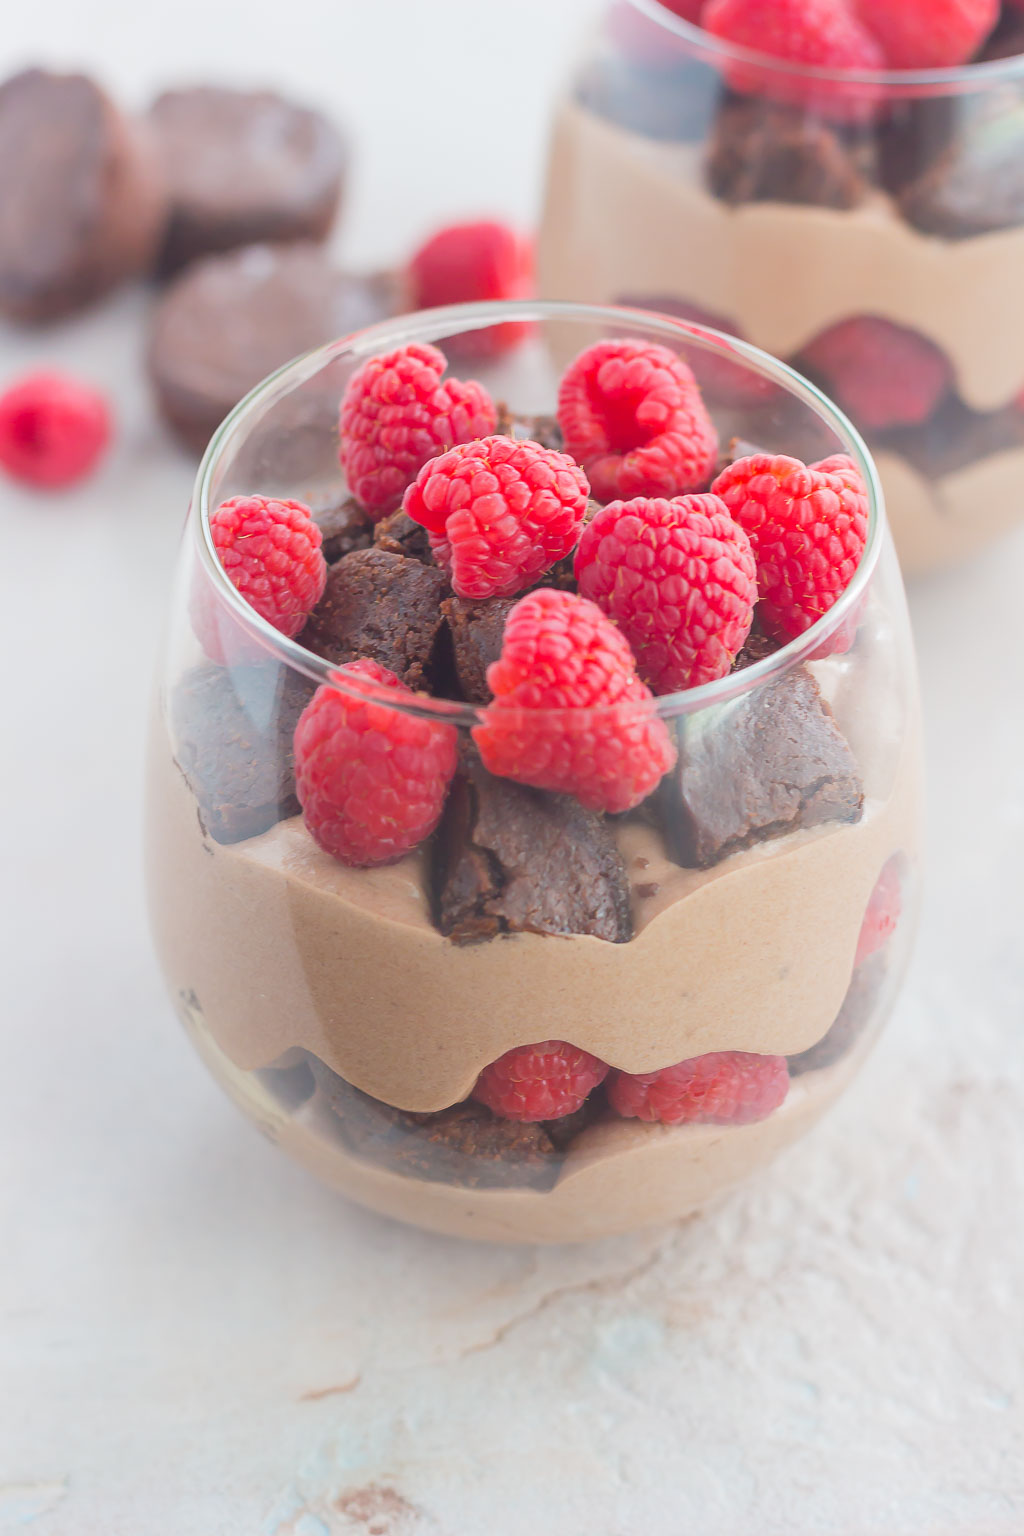 Raspberry Brownie Parfaits make a simple dessert that's ready in no time. Rich brownie chunks and fresh raspberries are layered together with whipped chocolate pudding to create the perfect sweet treat!